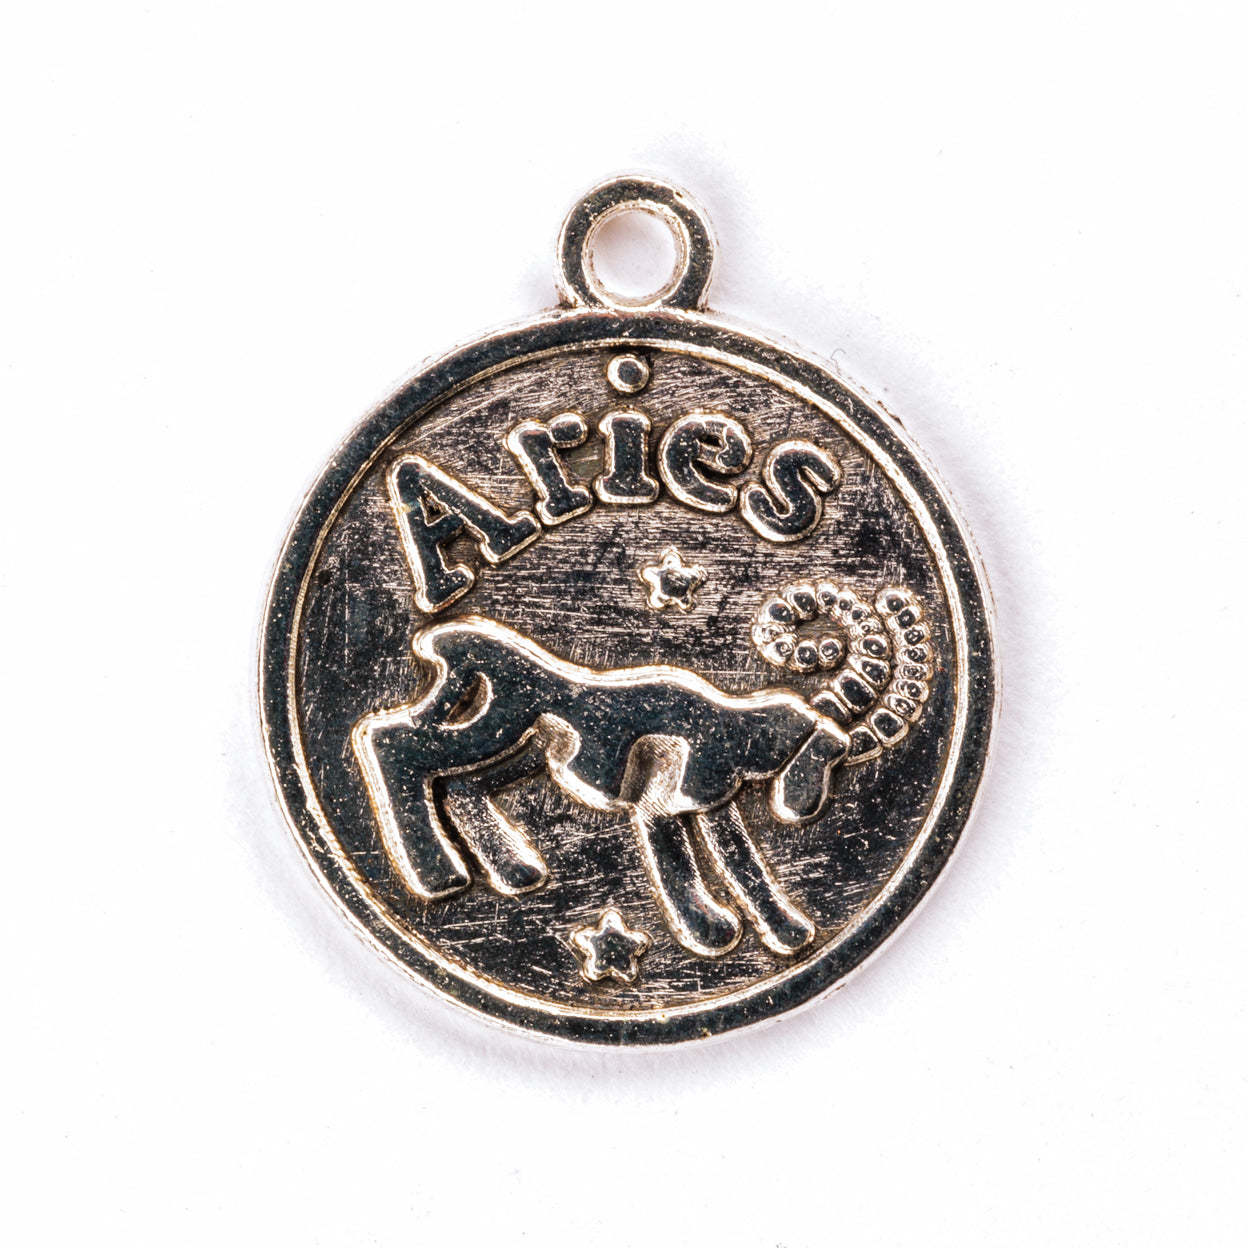 Charm - Aries (March 21-April 20)